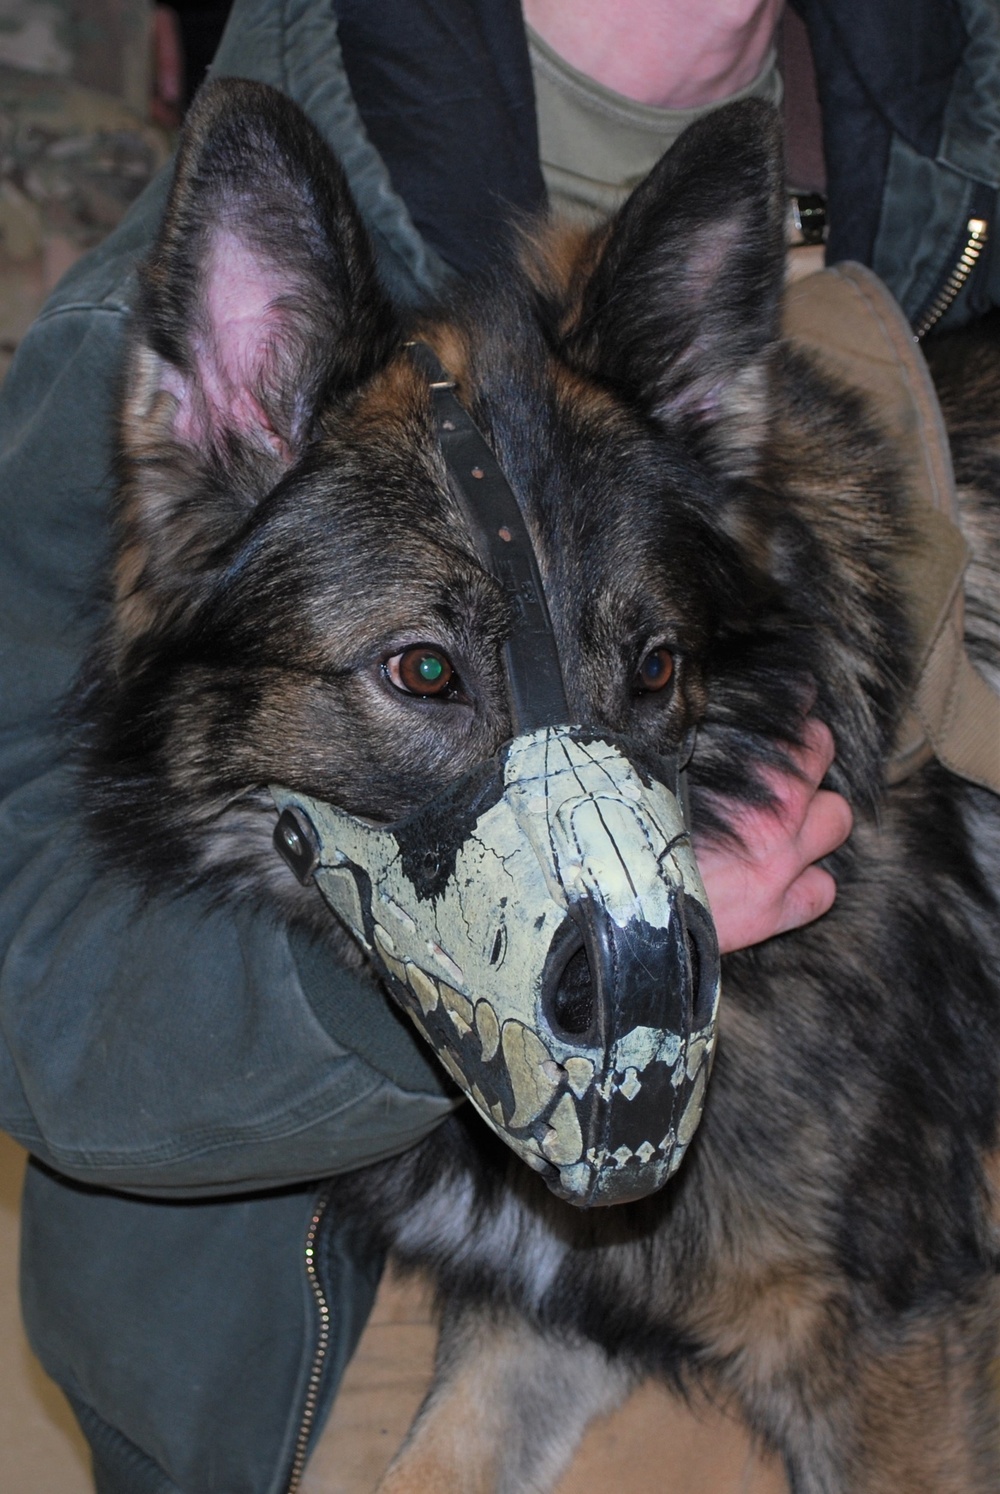 Fort Wainwright MSTC debuts K-9 First Responder class